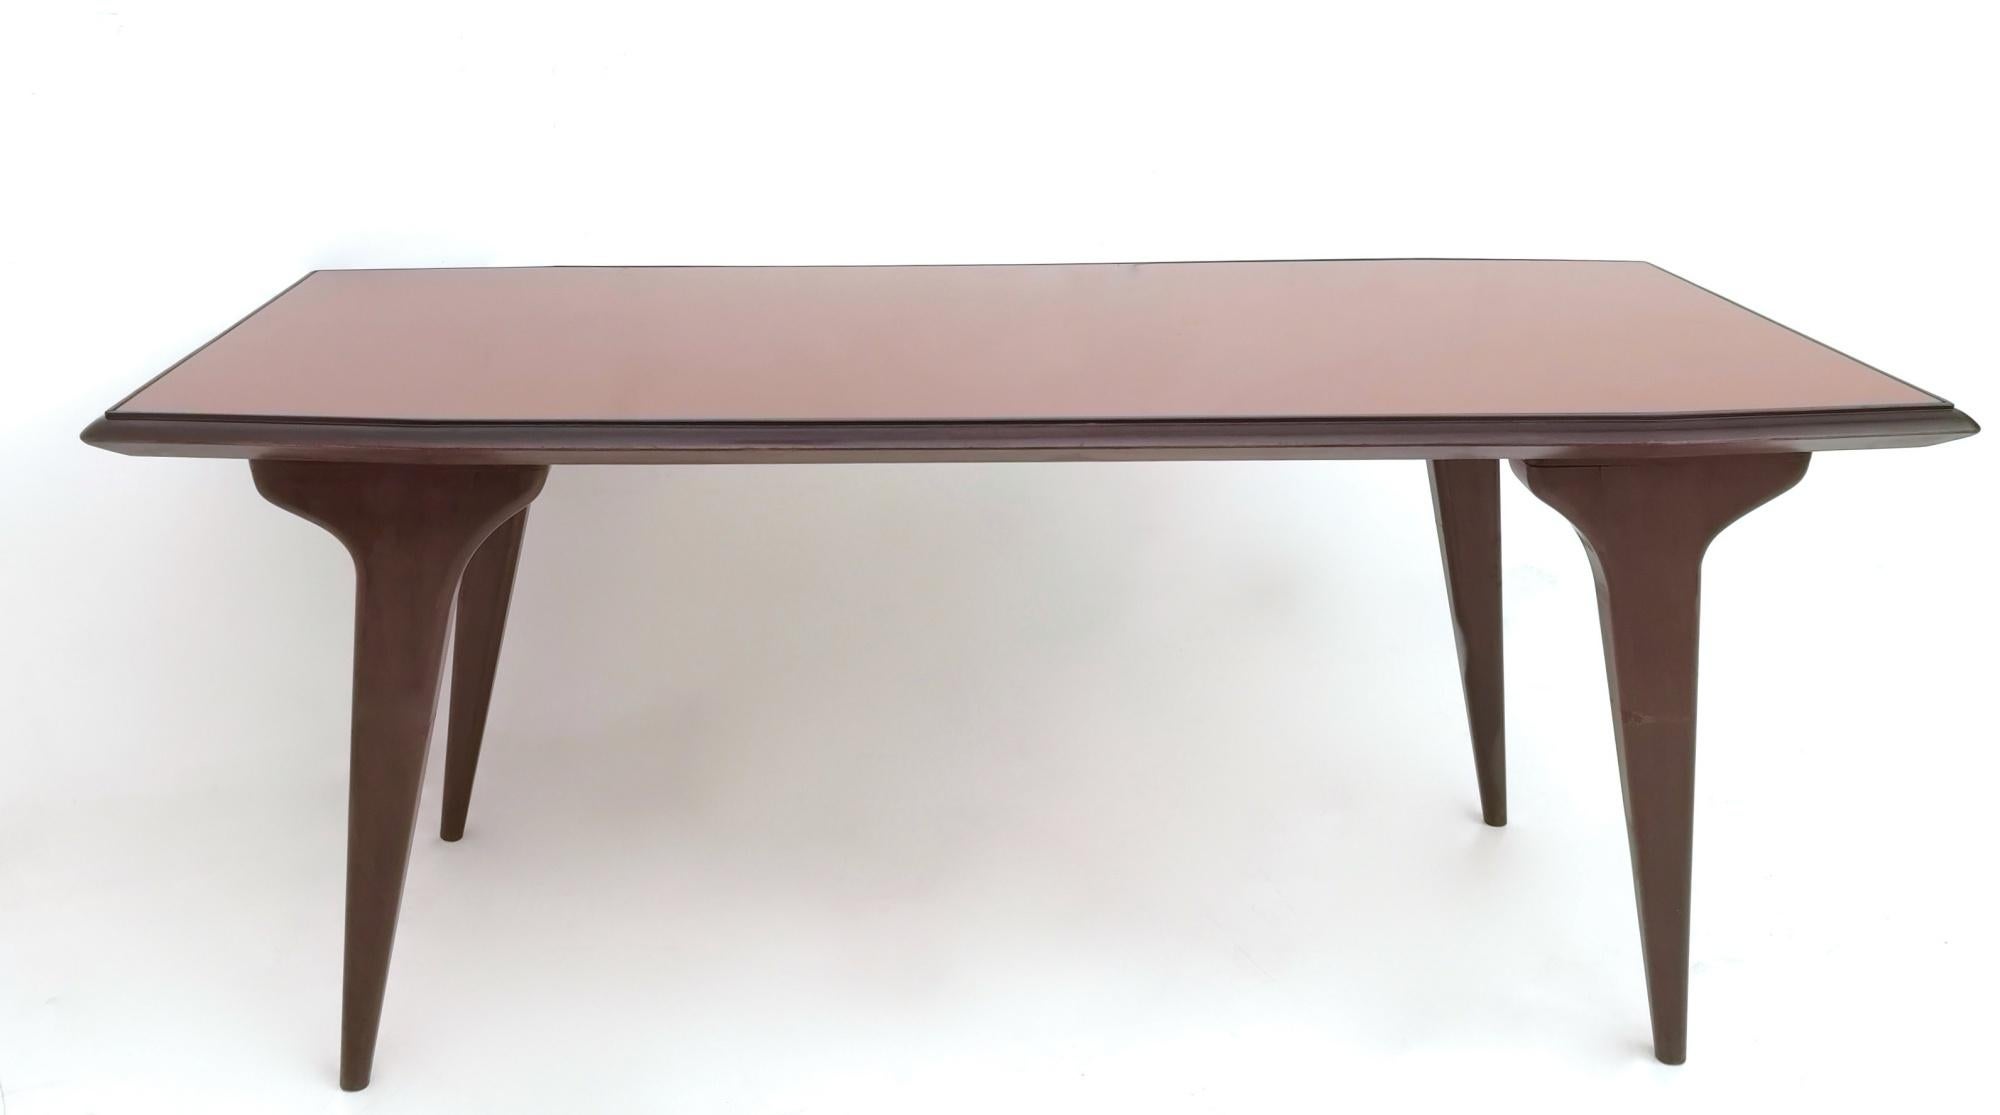 Italian Midcentury Beech Dining Table with a Copper Back-Painted Glass Top, Italy, 1950s